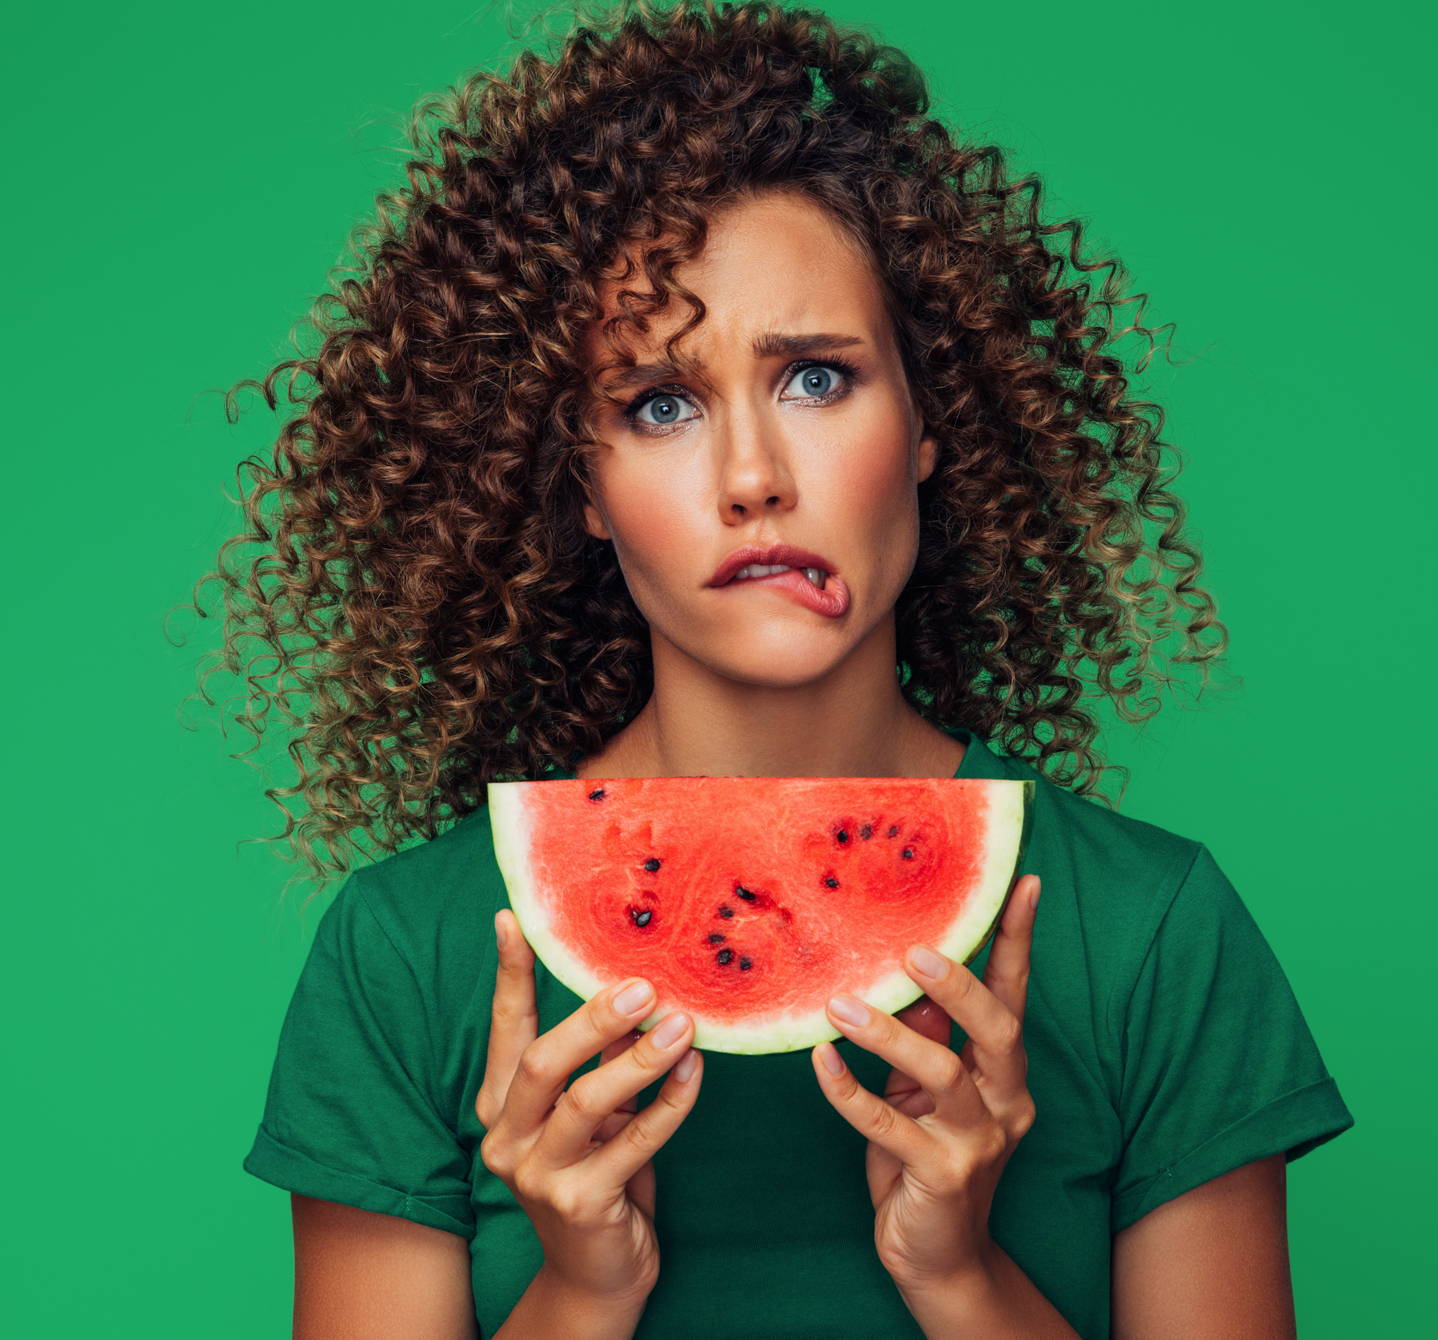 What is oral allergy syndrome? It could give this woman a tingly mouth if she has hay fever and eats her slice of watermelon